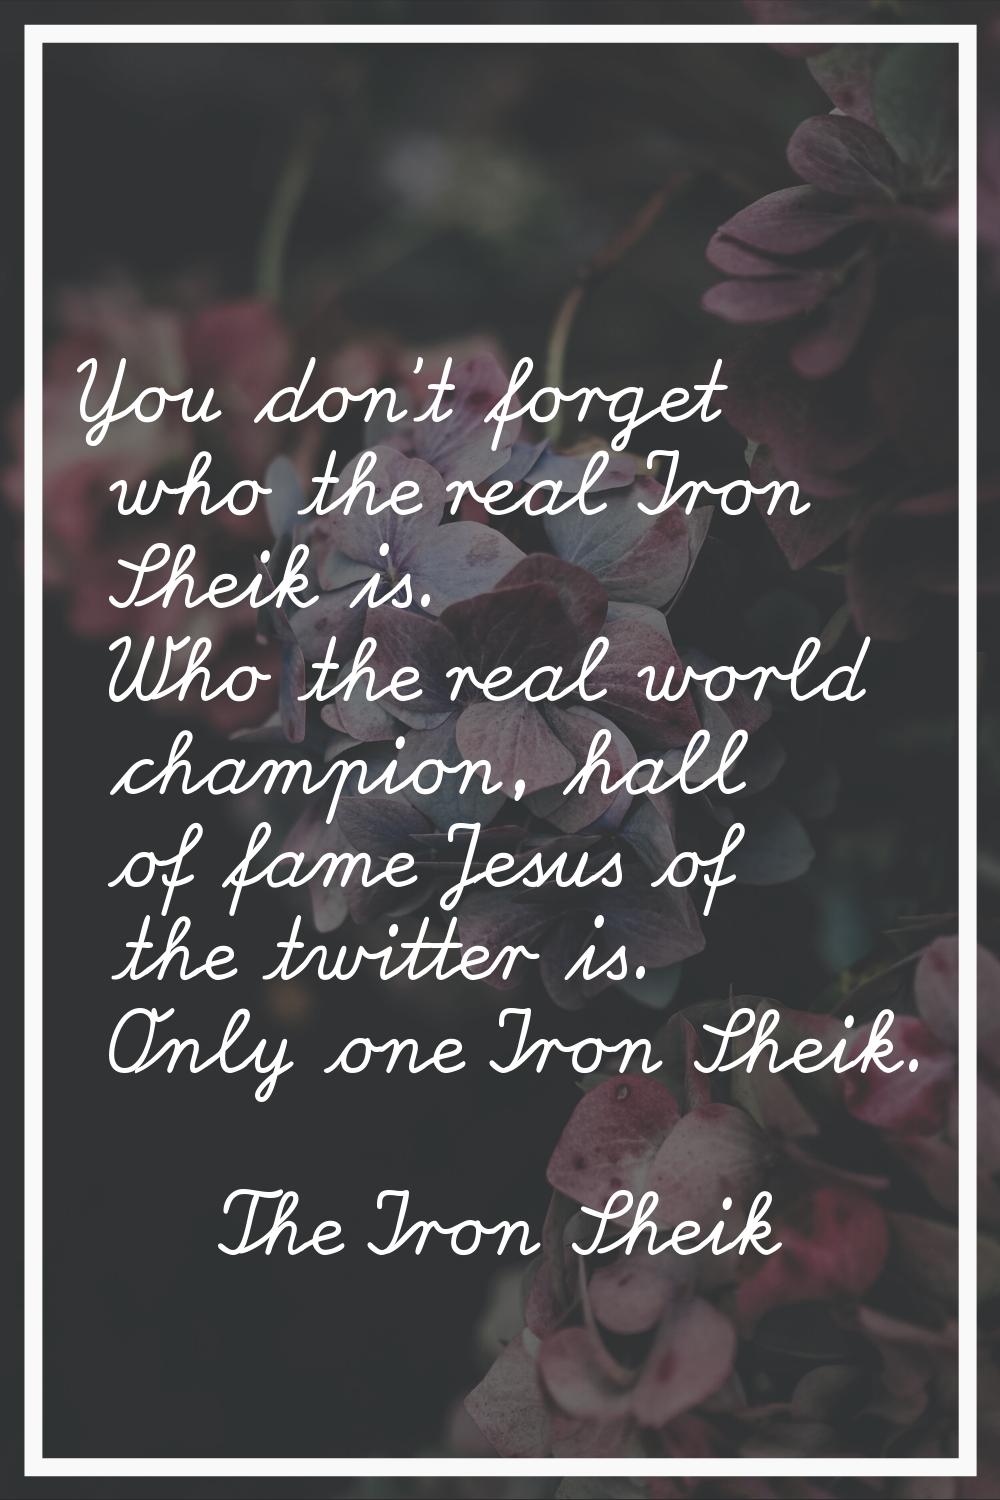 You don't forget who the real Iron Sheik is. Who the real world champion, hall of fame Jesus of the